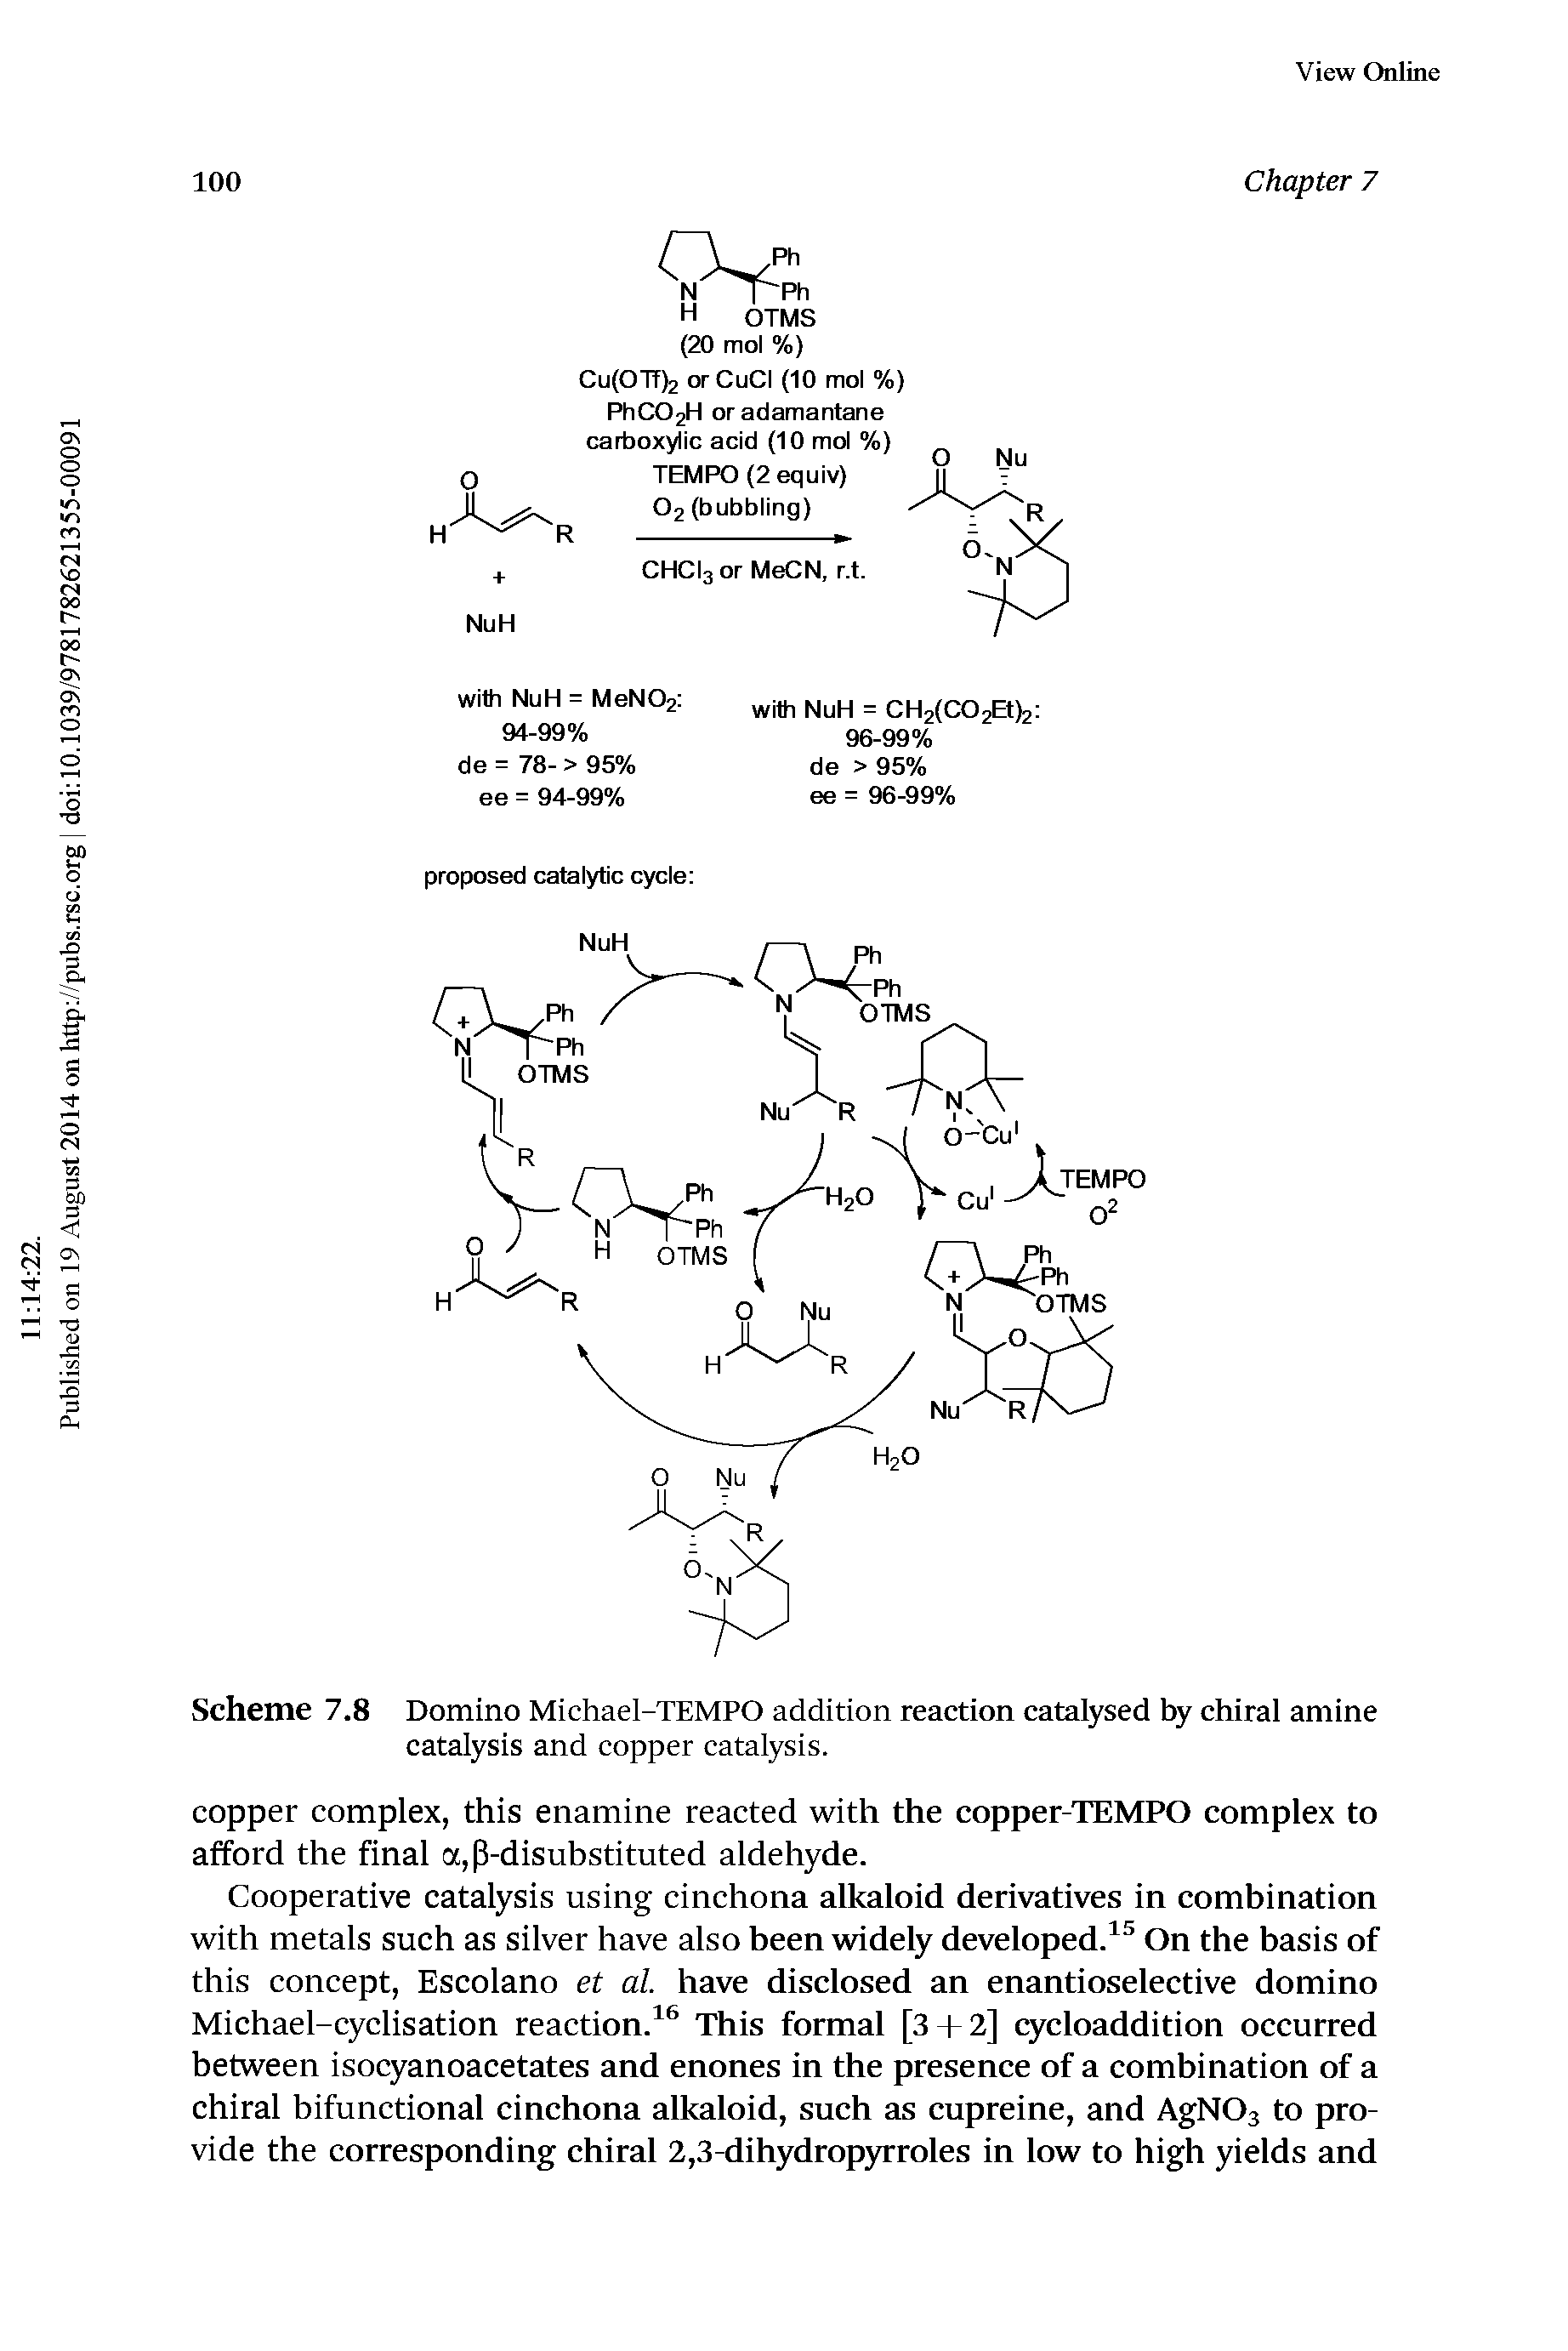 Scheme 7.8 Domino Michael-TEMPO addition reaction catalysed by chiral amine catalysis and copper catalysis.